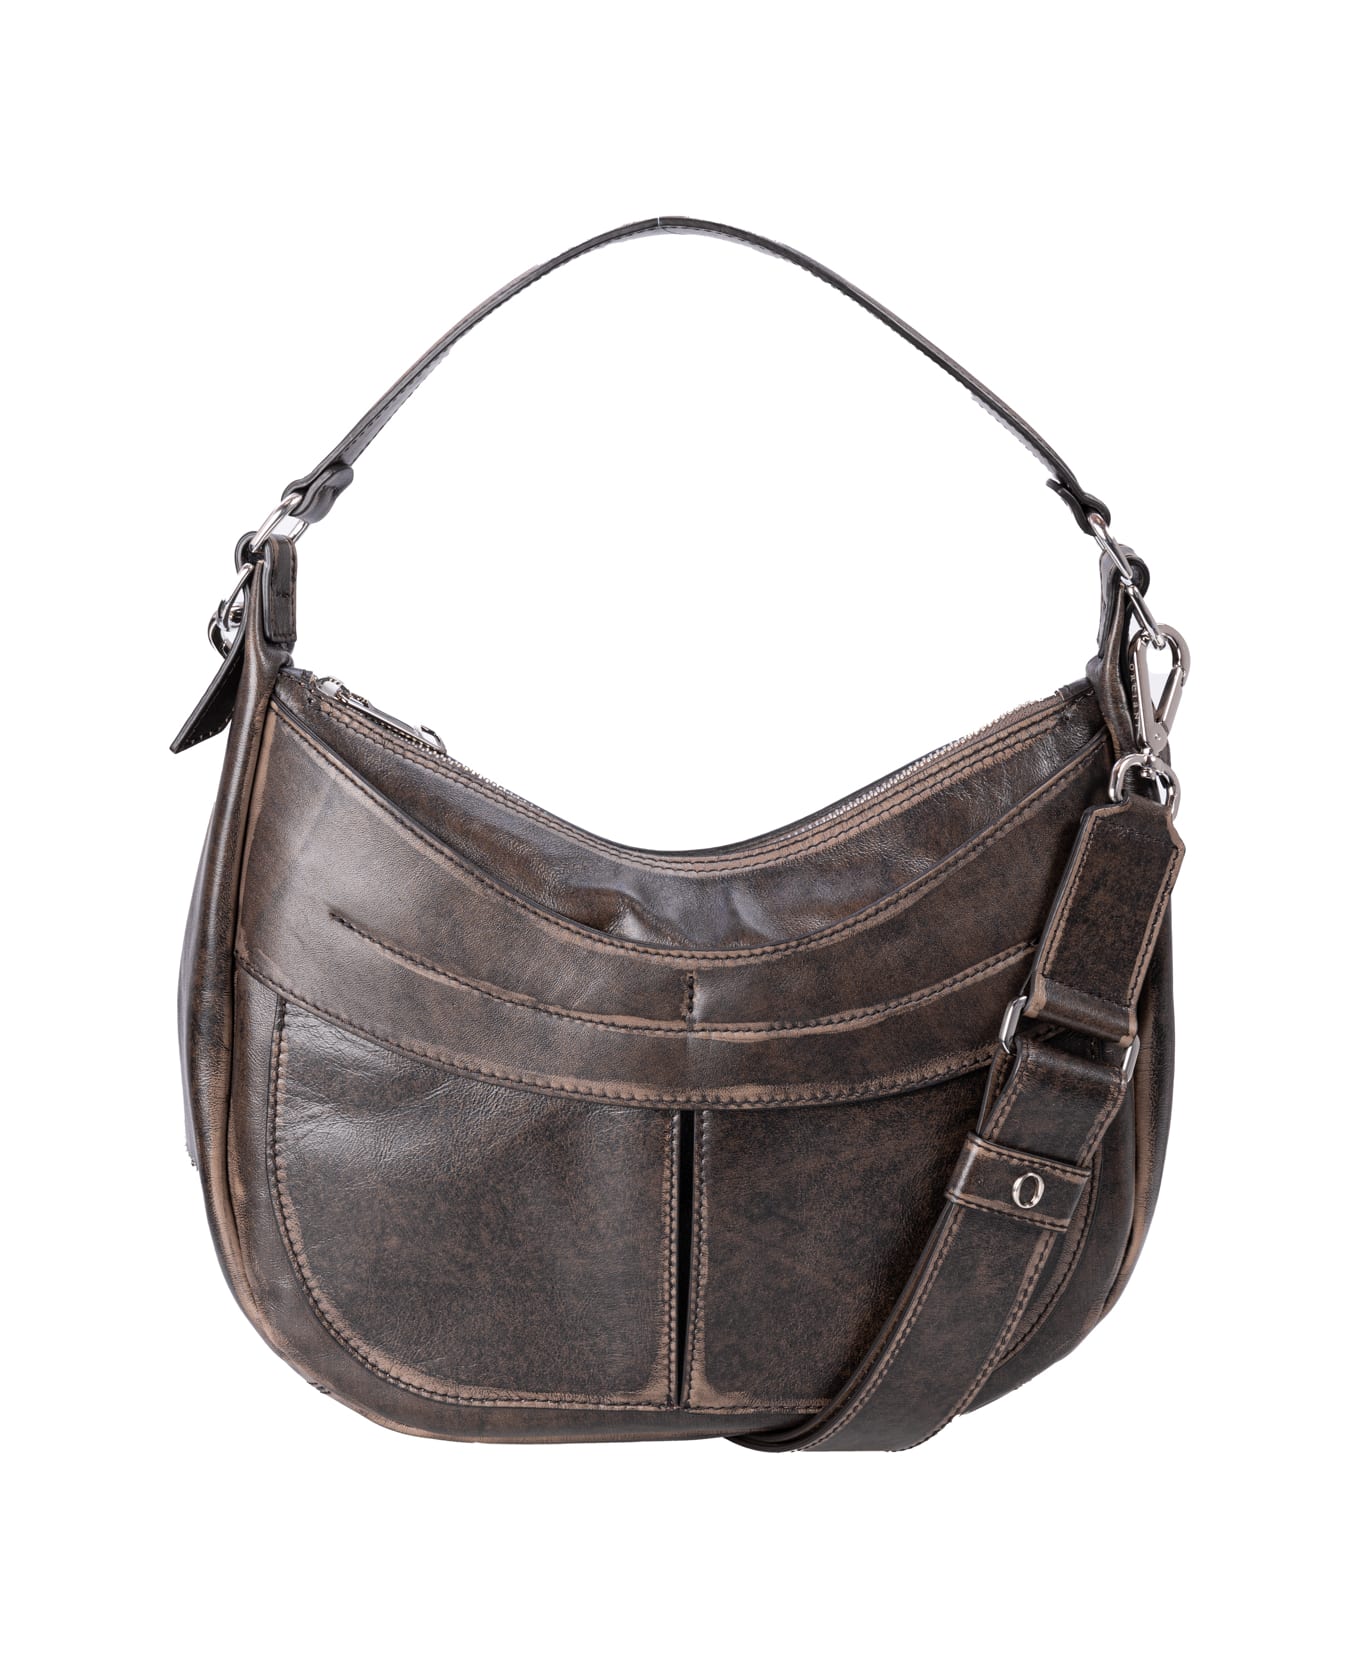 Orciani Leather Bag - Beige